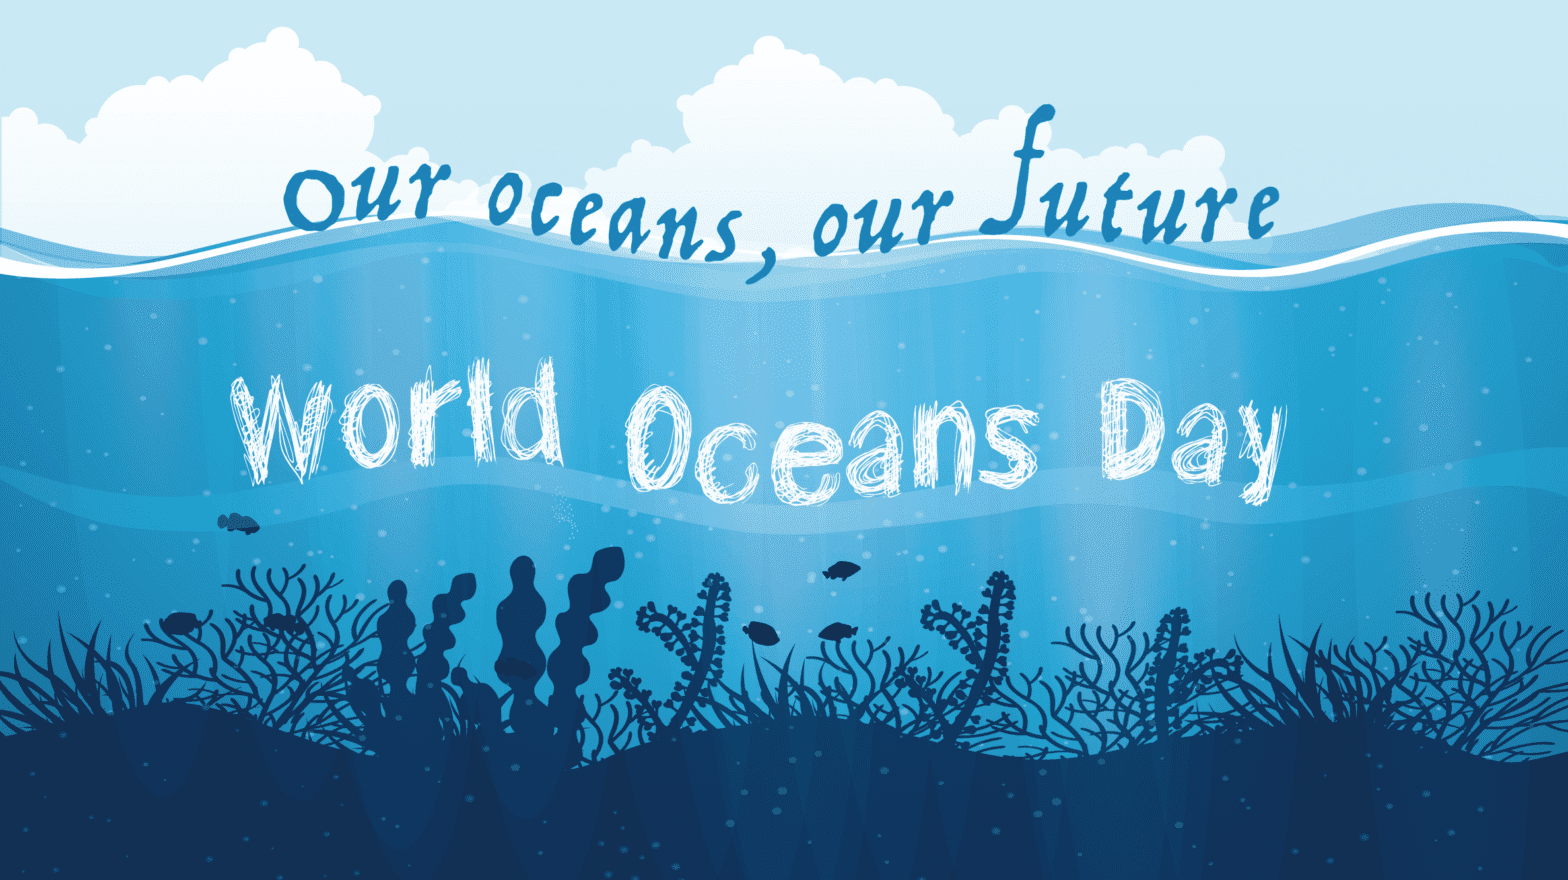 World Oceans Day Photo Contest